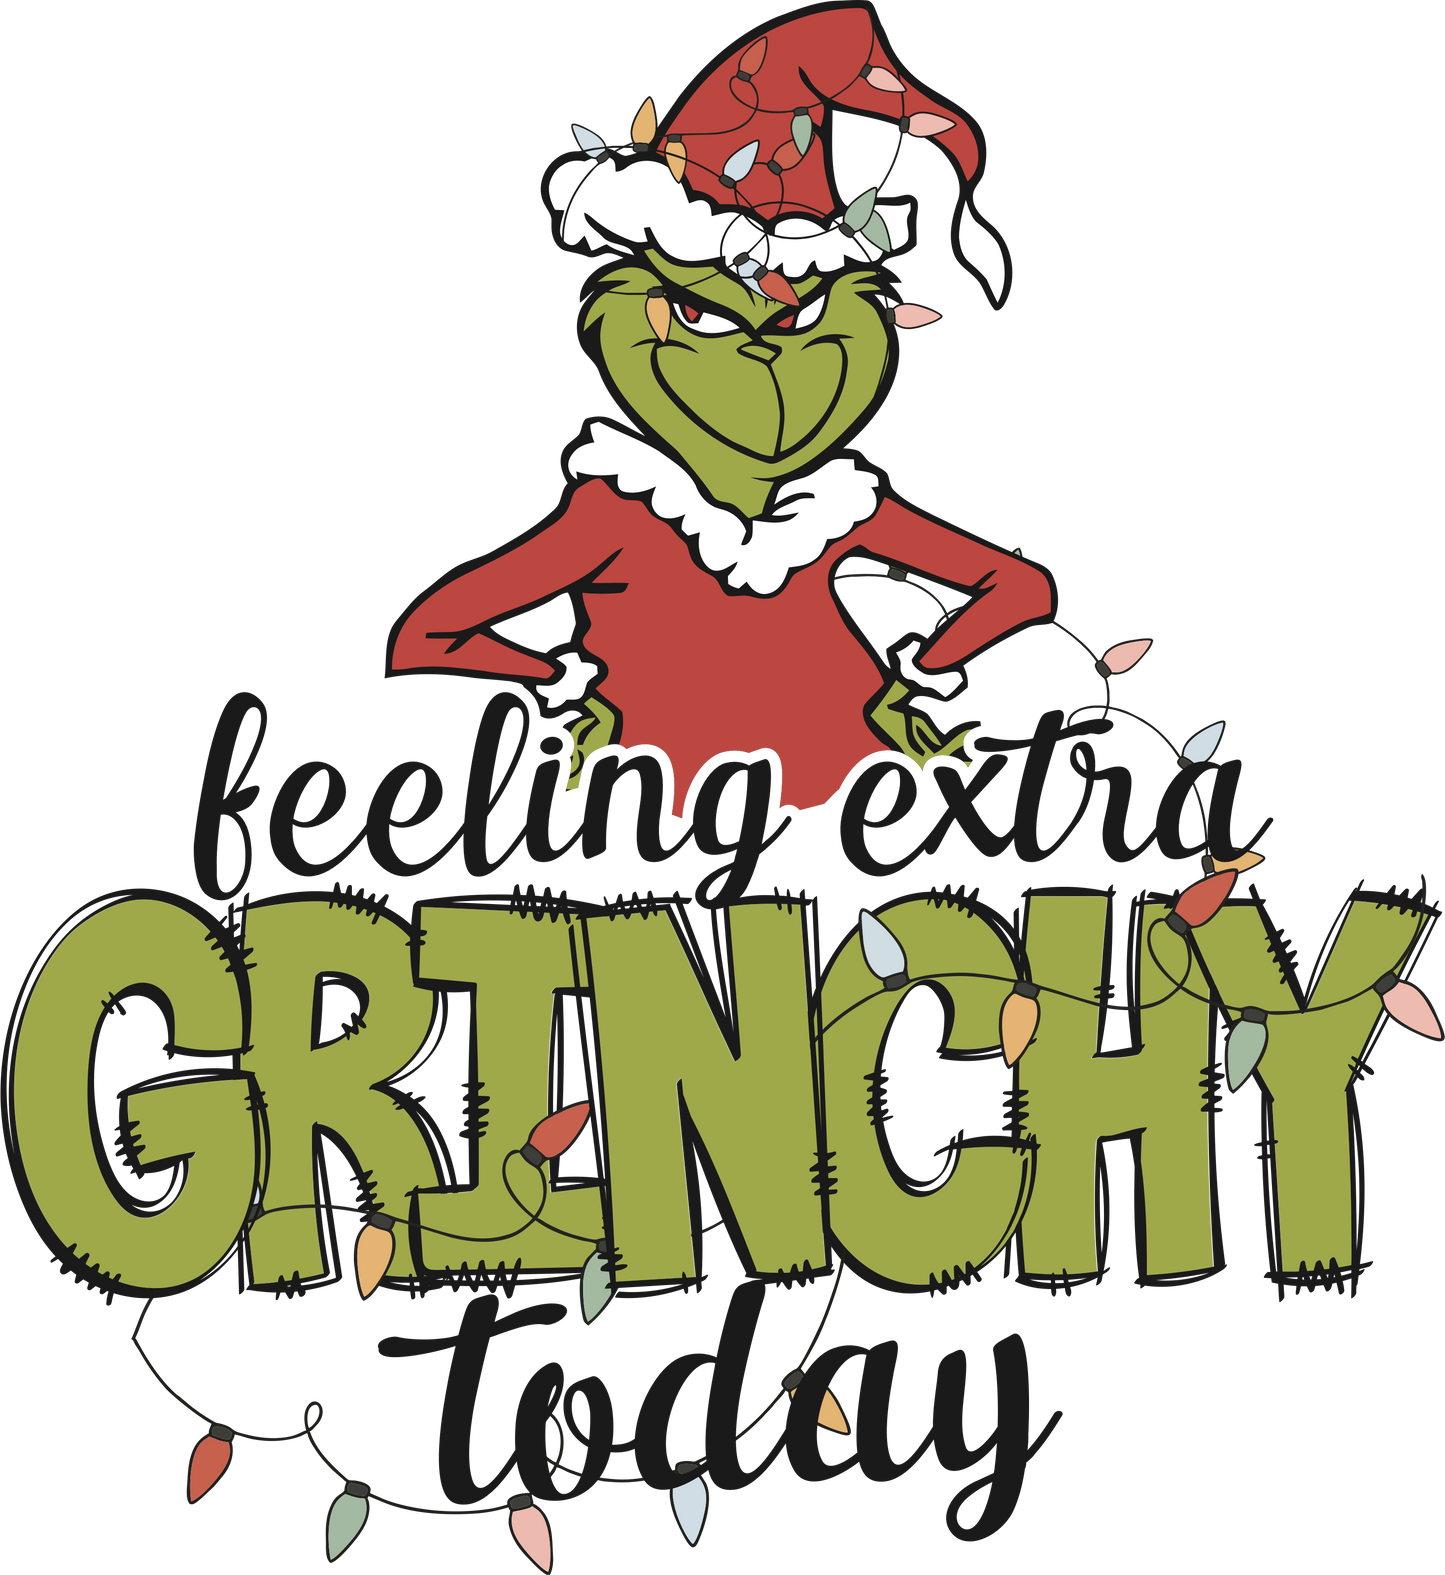 FEELING EXTRA GRINCHY TODAY